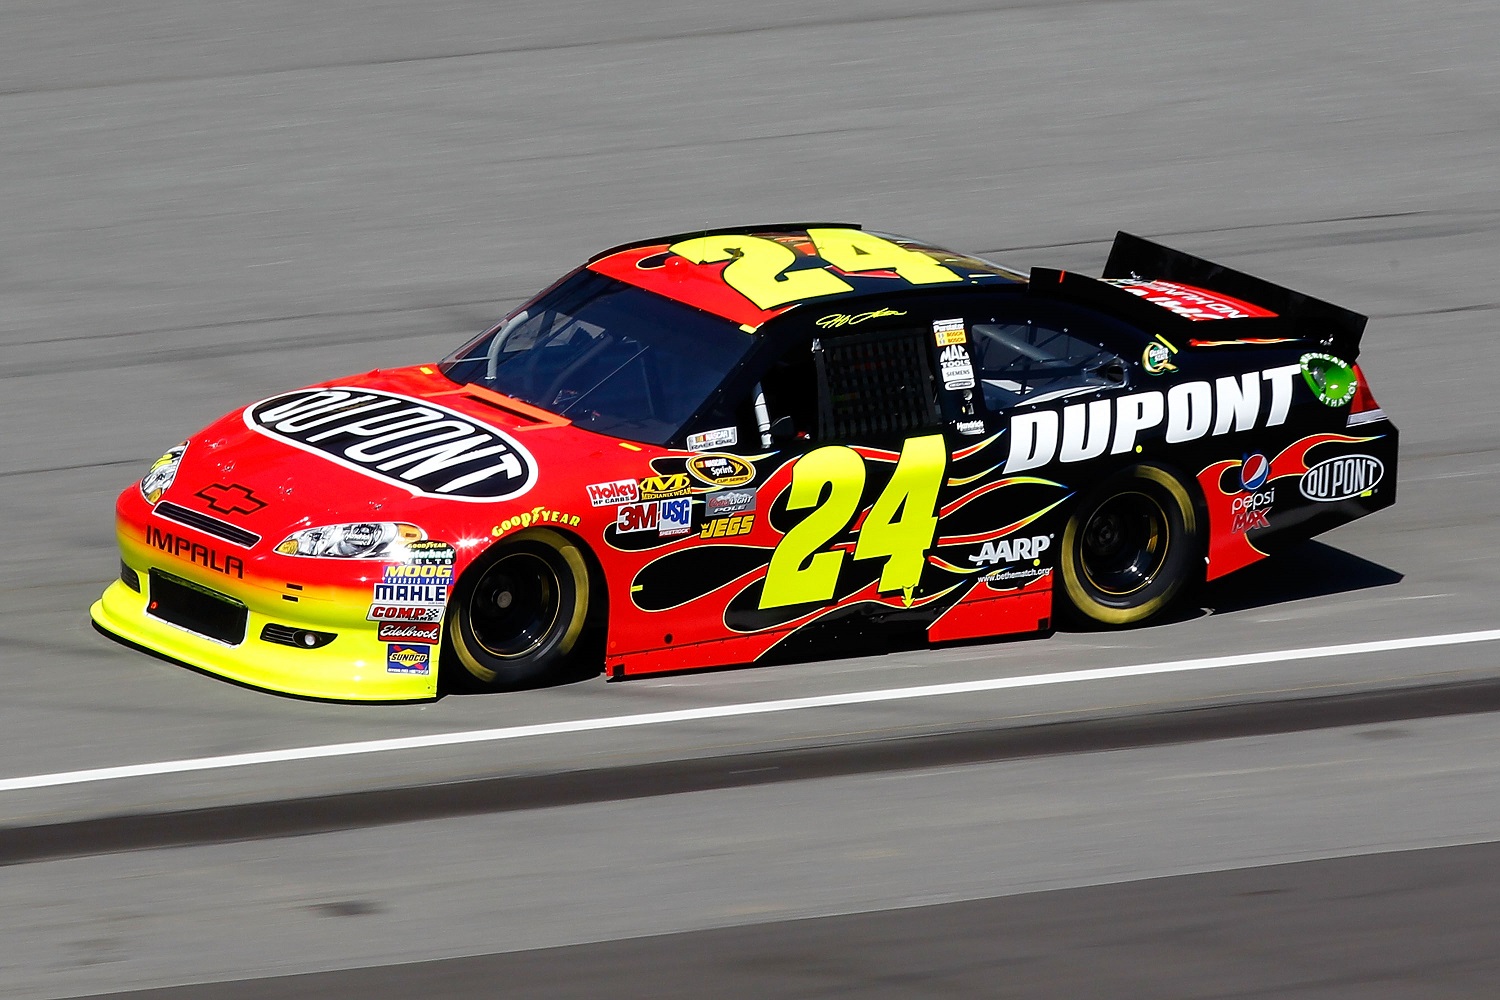 Jeff Gordon drives the No. 24 Chevrolet during practice for the NASCAR Sprint Cup Series Pure Michigan 400 at Michigan International Speedway on Aug. 19, 2011.